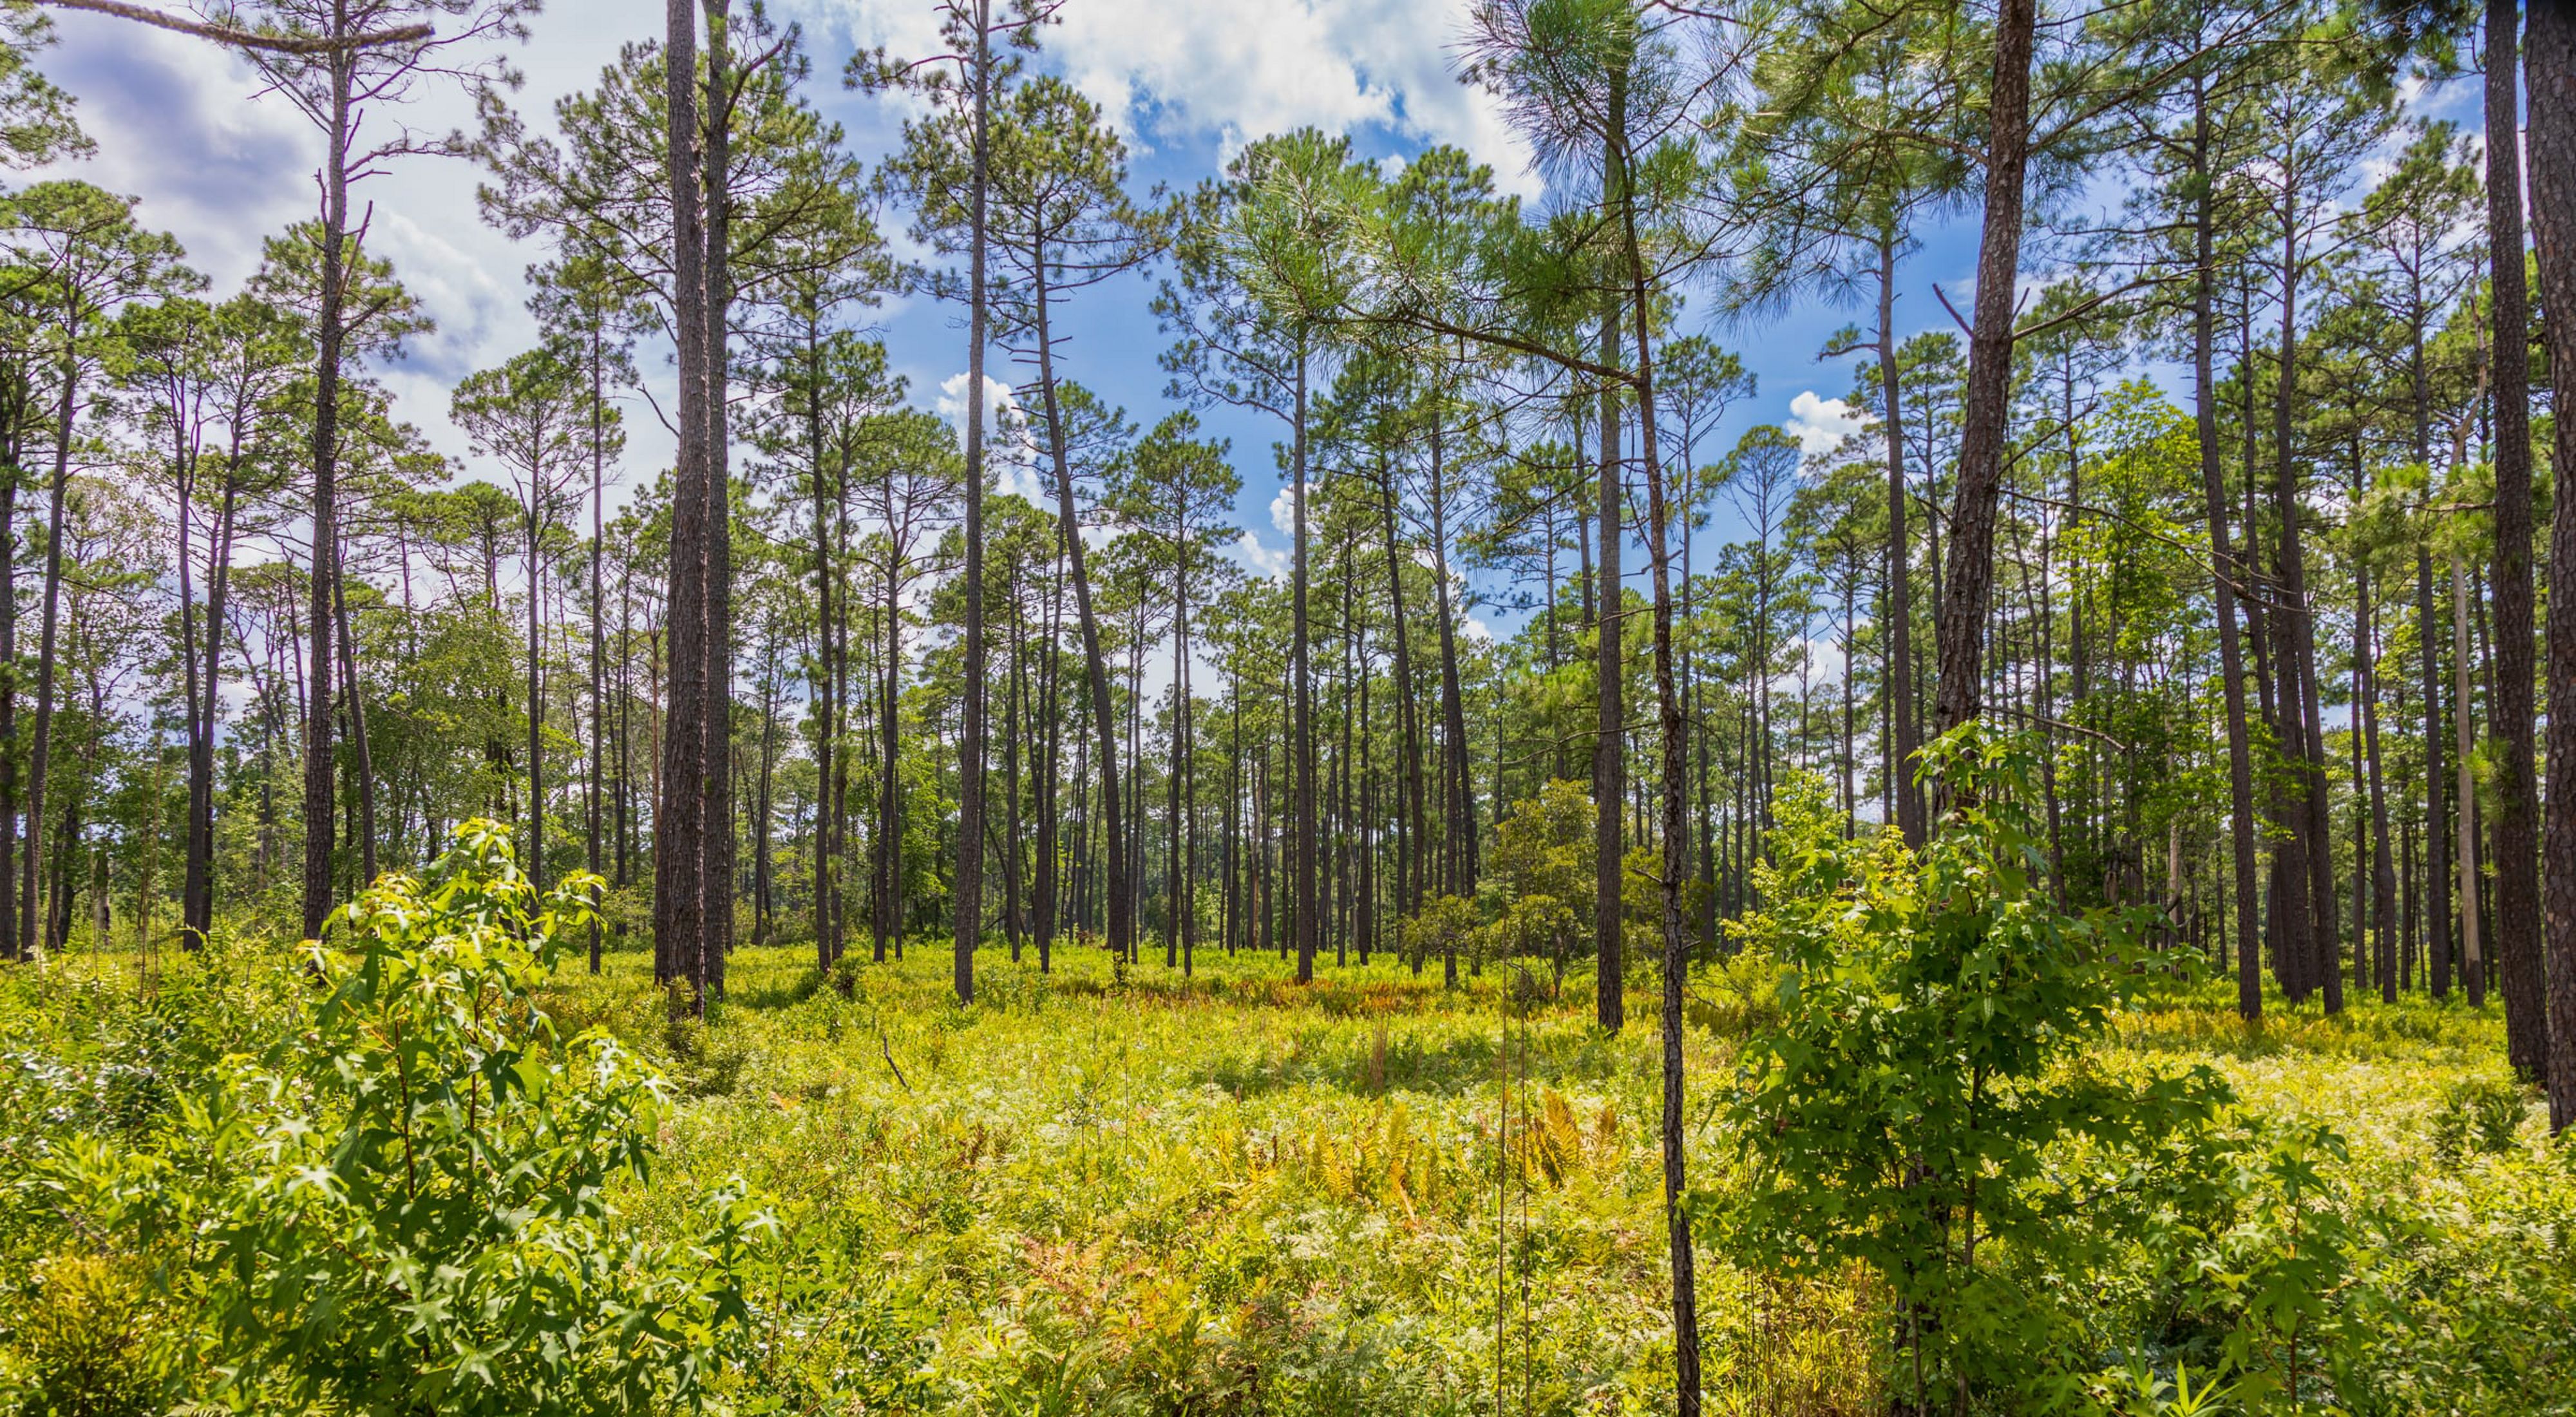 Blue skies frame a large stand of tall pine trees surrounded by grasses.